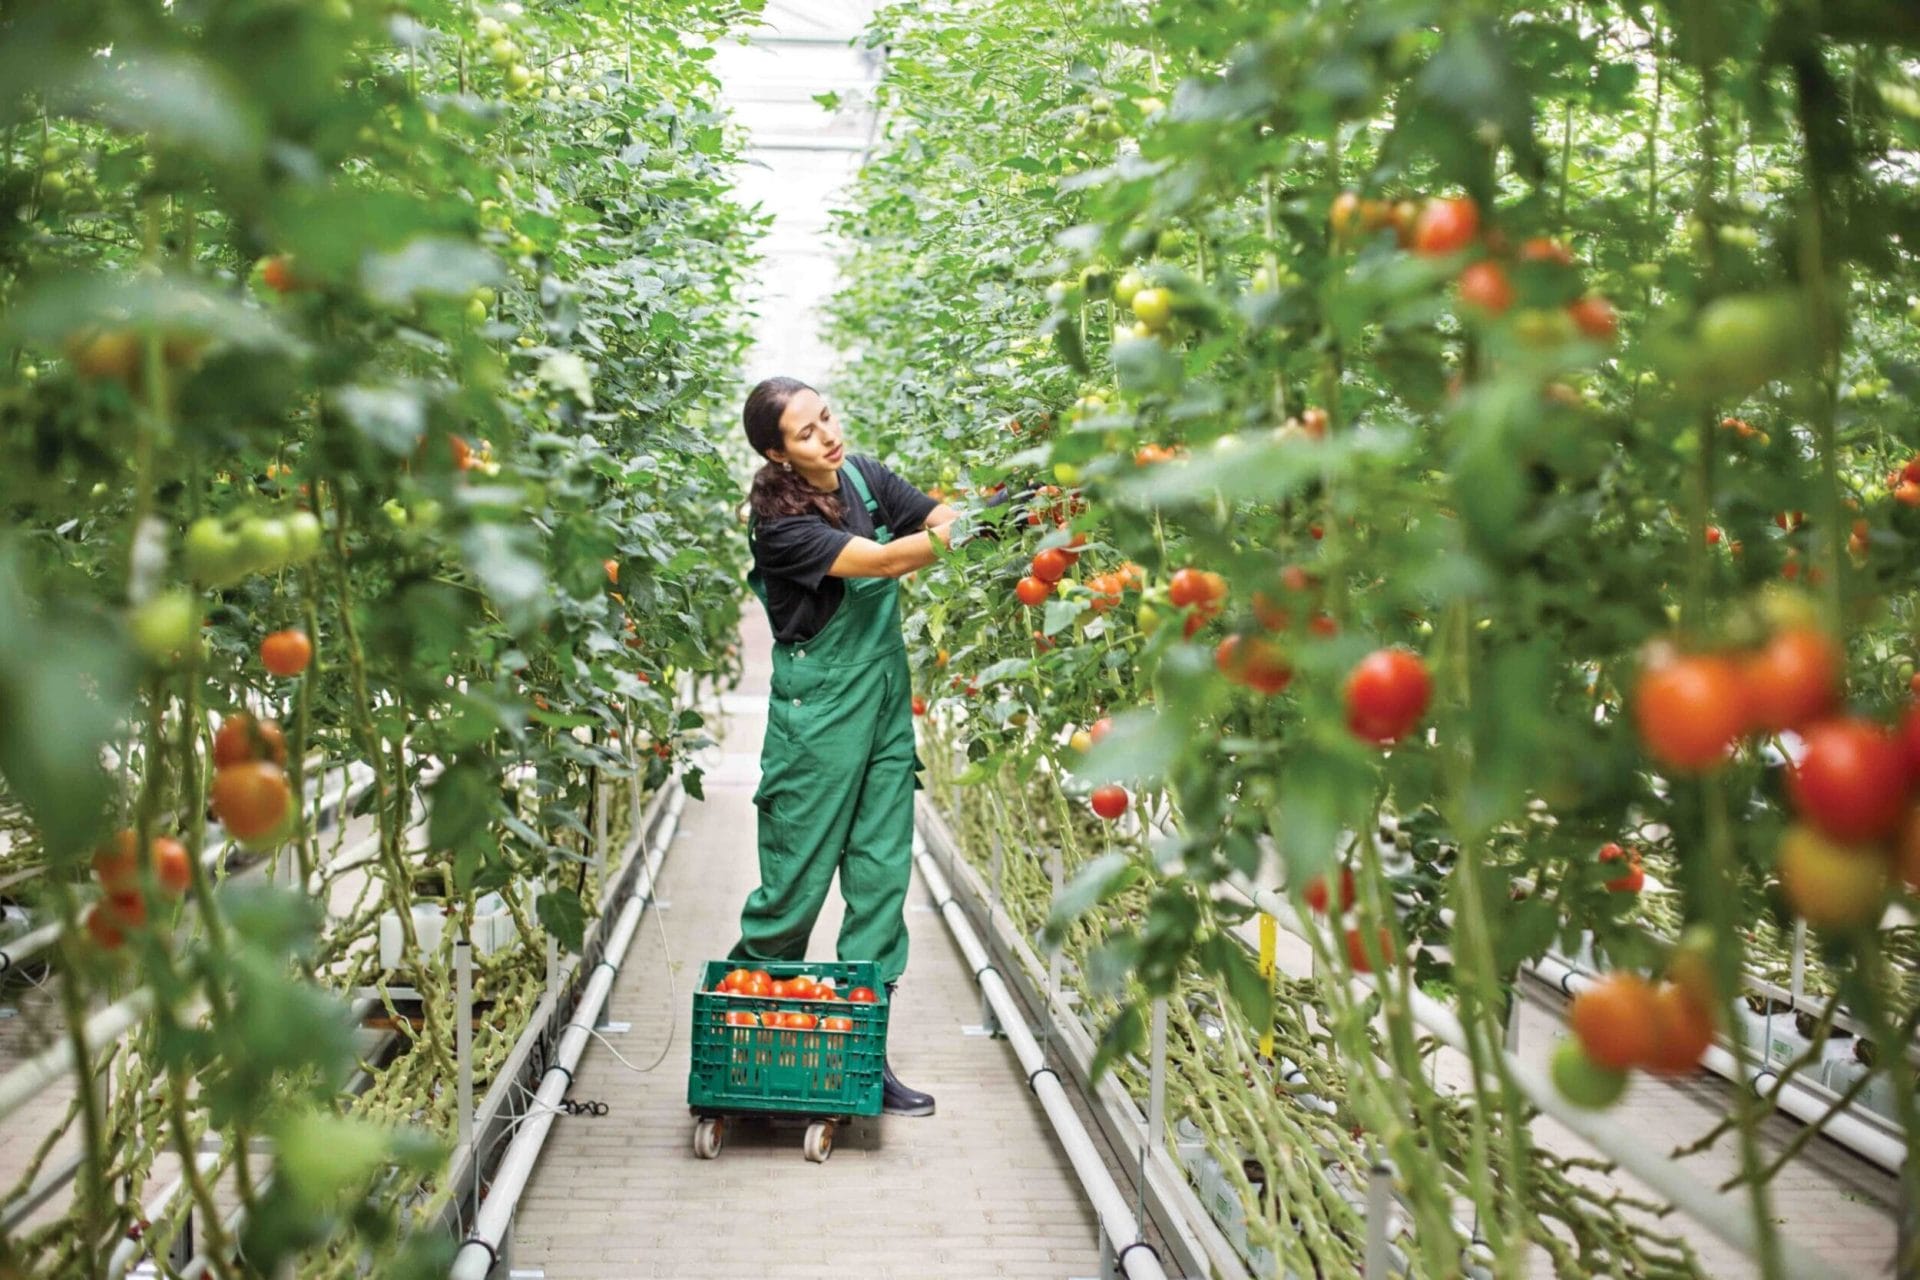 Greenhouse growers across the UK have suffered from huge increases in their energy costs